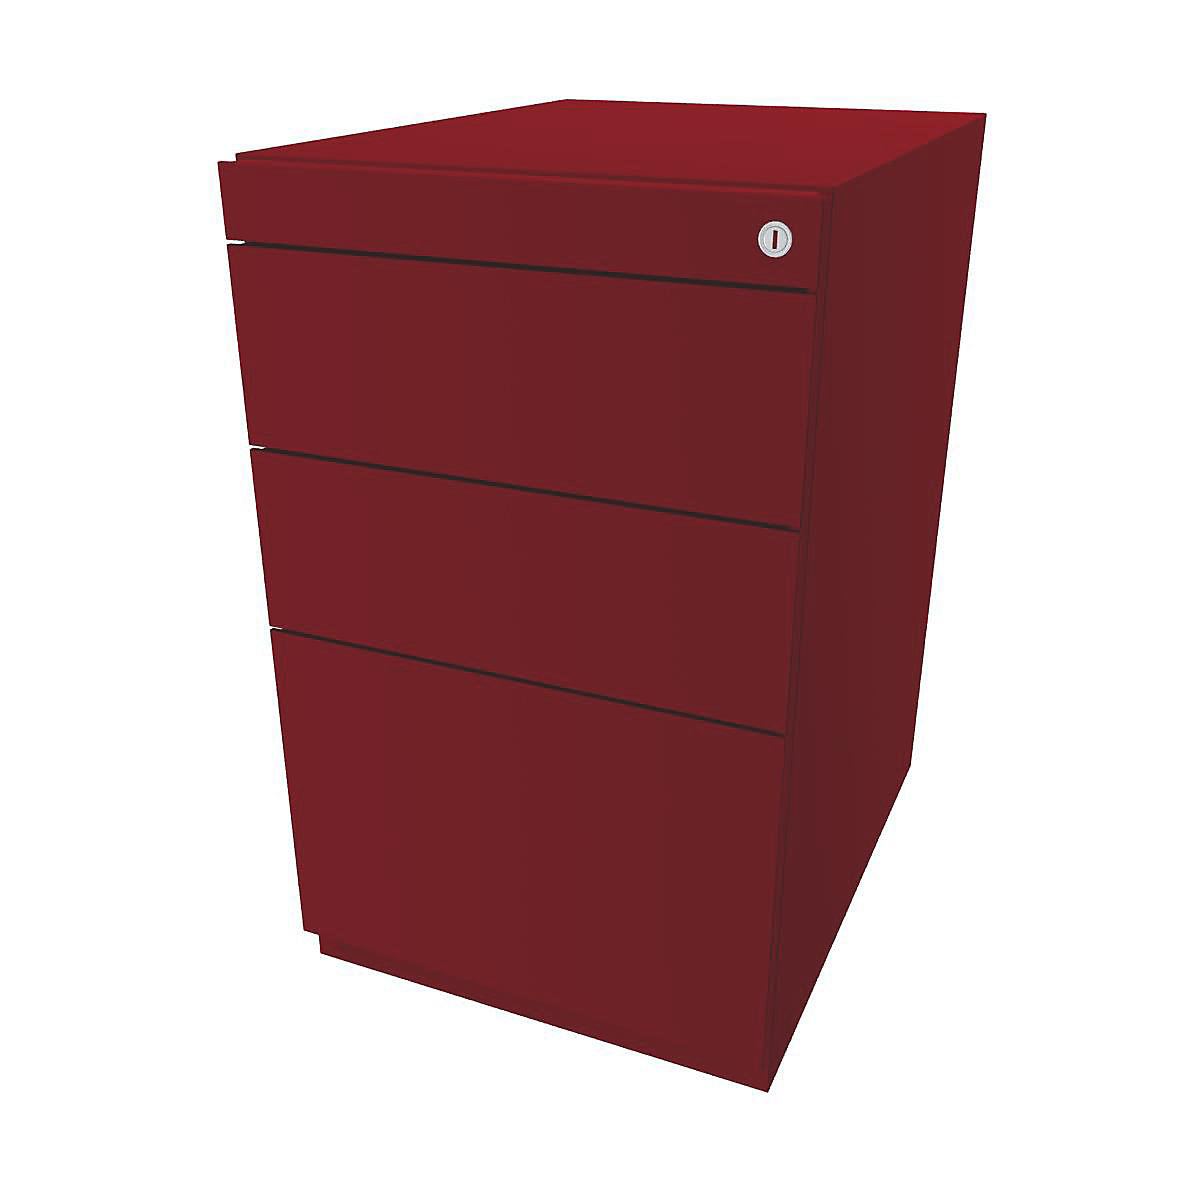 Note™ fixed pedestal, with 2 universal drawers, 1 suspension file drawer – BISLEY, without top, depth 565 mm, cardinal red-9